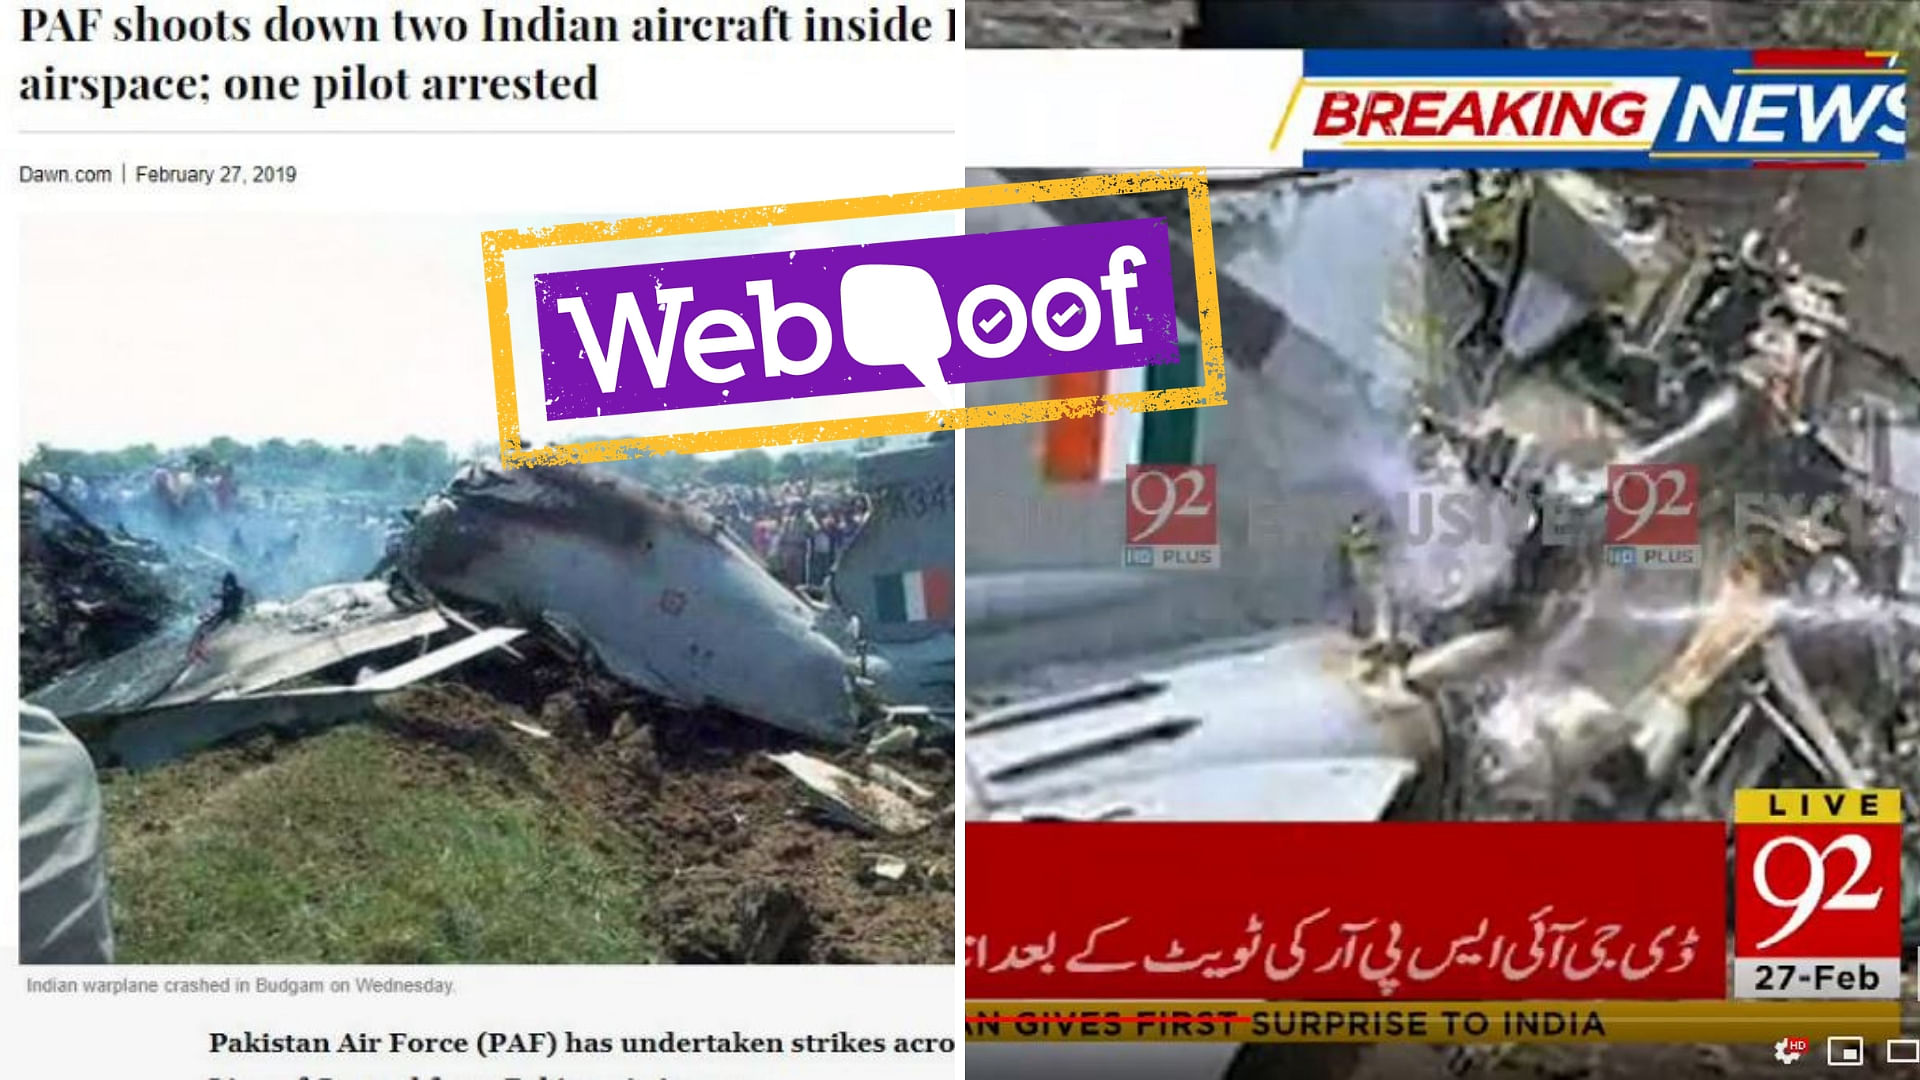 Pakistani news media, including Dawn, passed off old photos as the Budgam air crash.